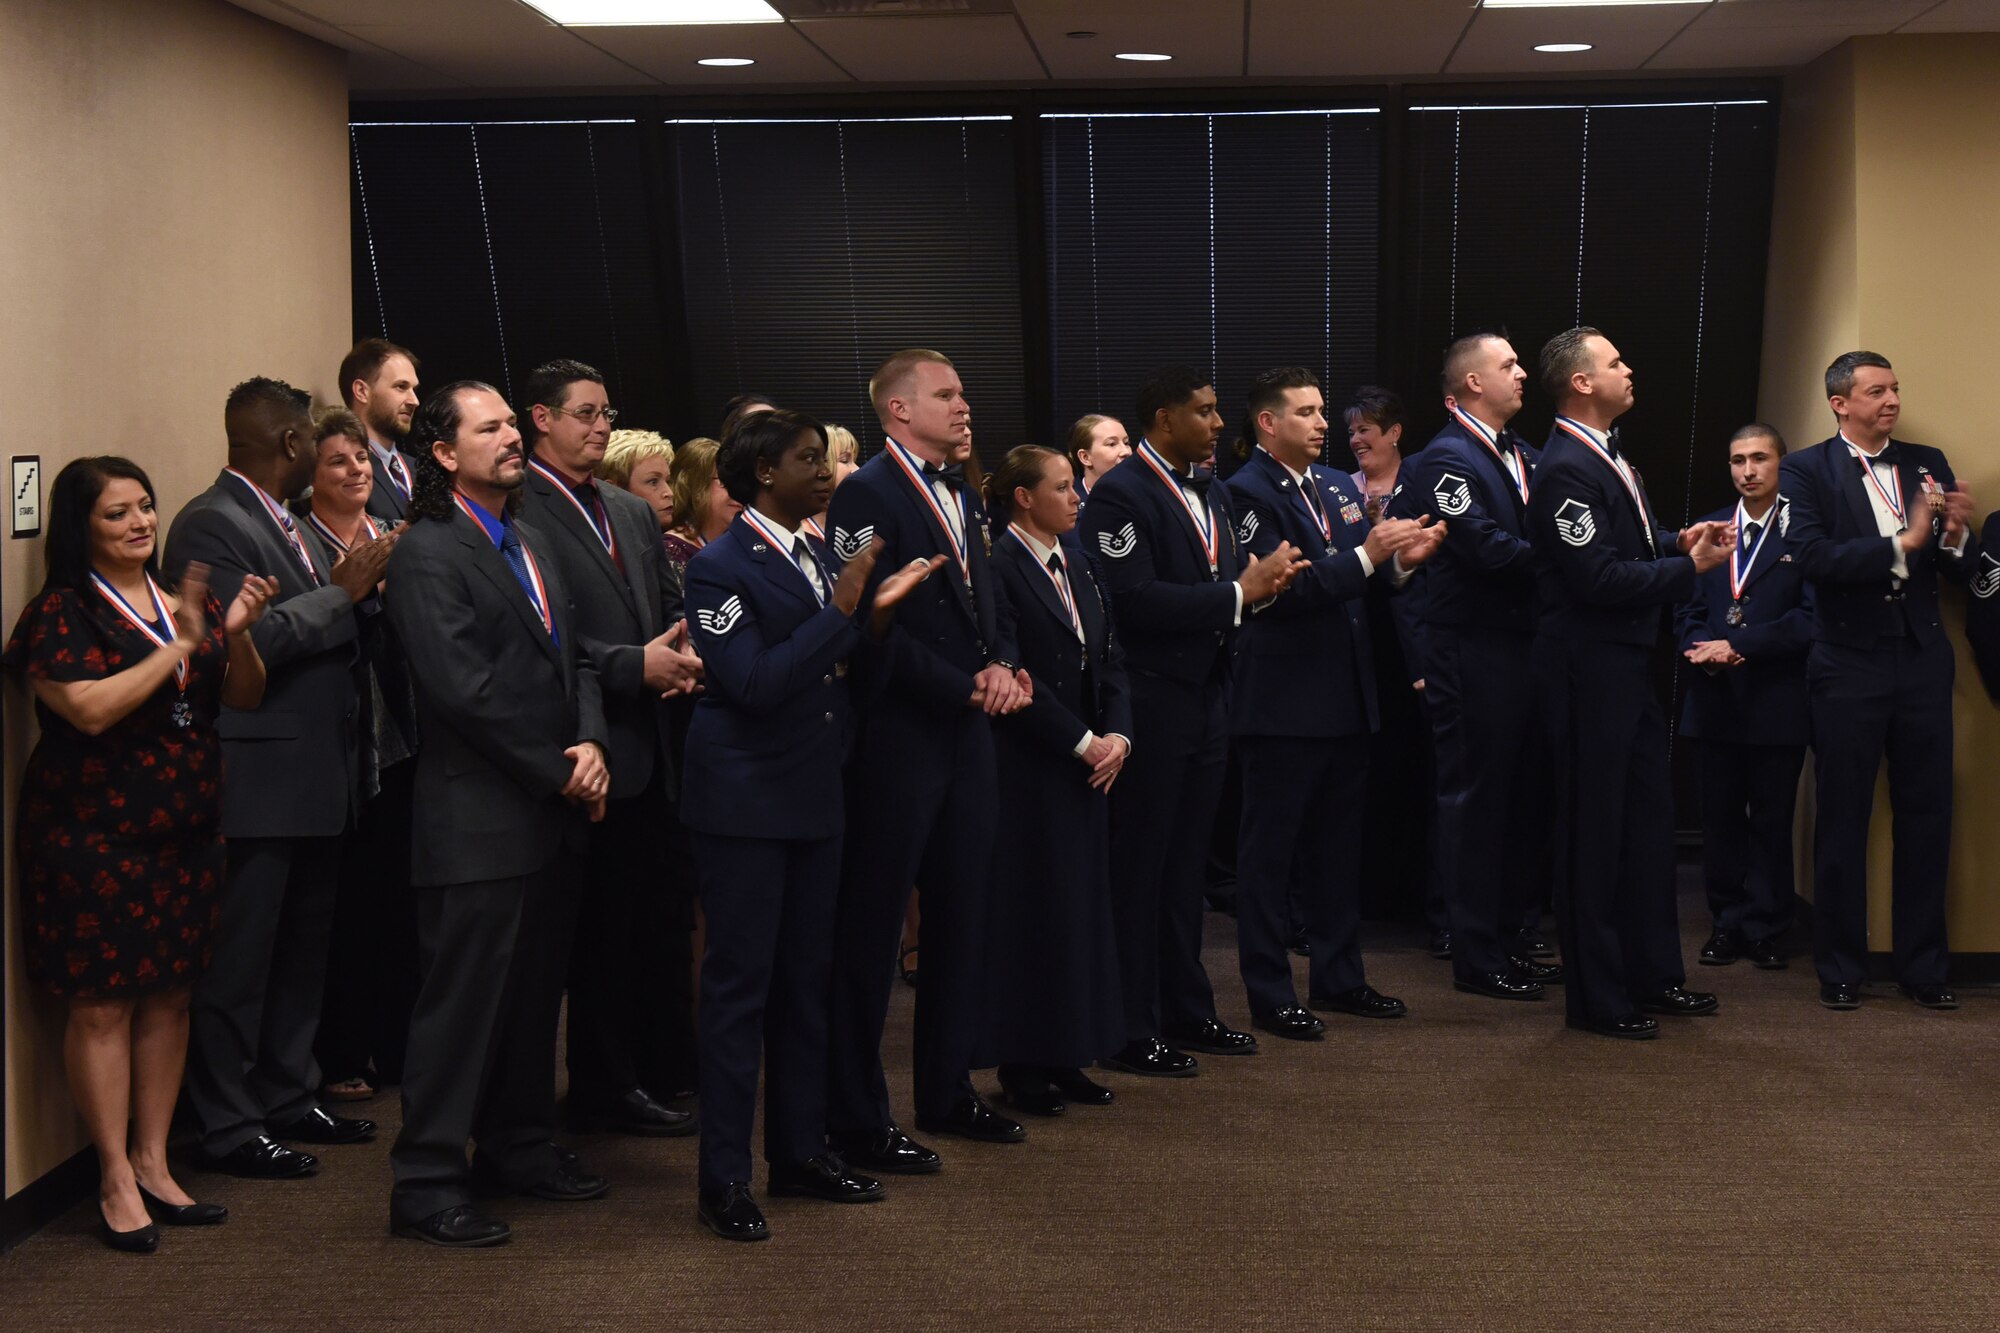 Annual Award nominees celebrate during the 25th Annual Awards Ceremony at the McNeese Convention Center in San Angelo, Texas, Feb. 9, 2018. Each nominee received a medallion as recognition for their nomination. (U.S. Air Force photo by Airman 1st Class Zachary Chapman)